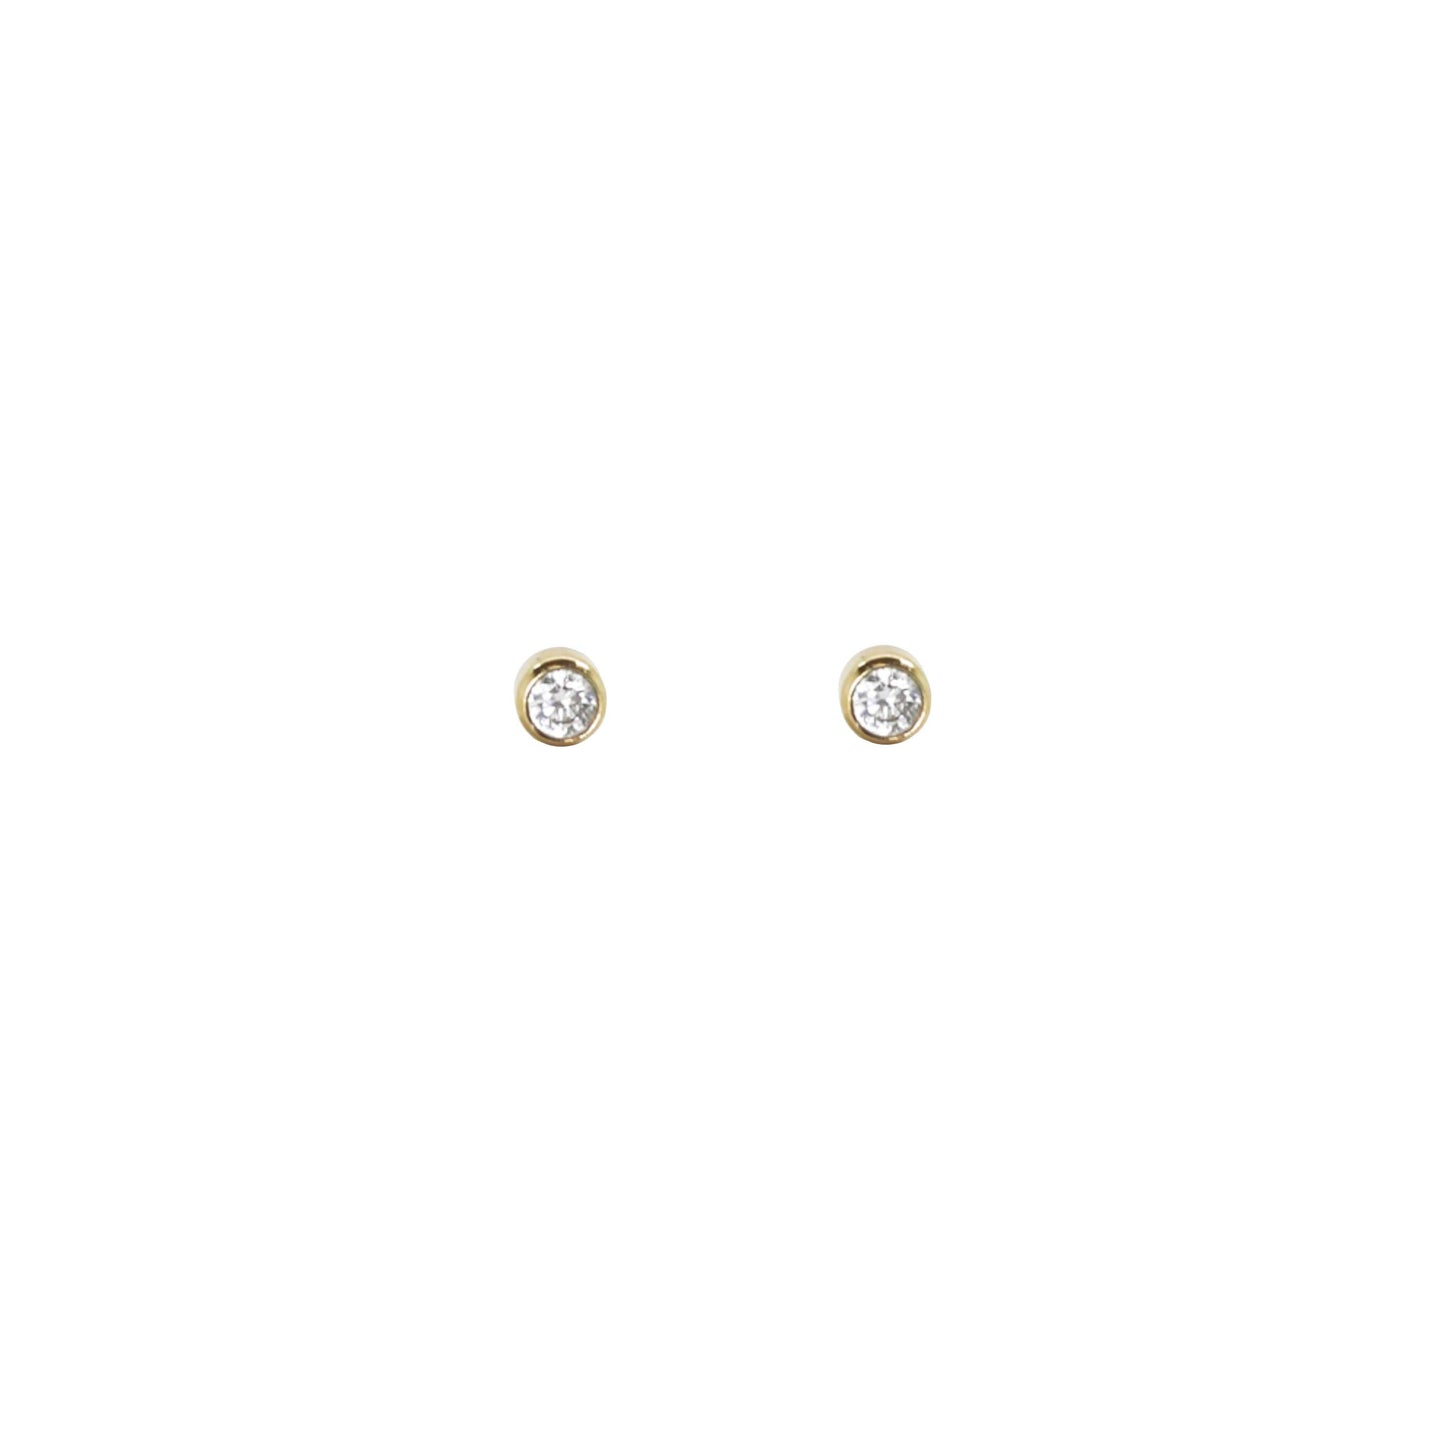 gold filled crystal stud earring. gold filled crystal stud. crystal stud earring. qz stud earring. Effortless stud earring. Effortless crystal stud earring. Gems by Laura.